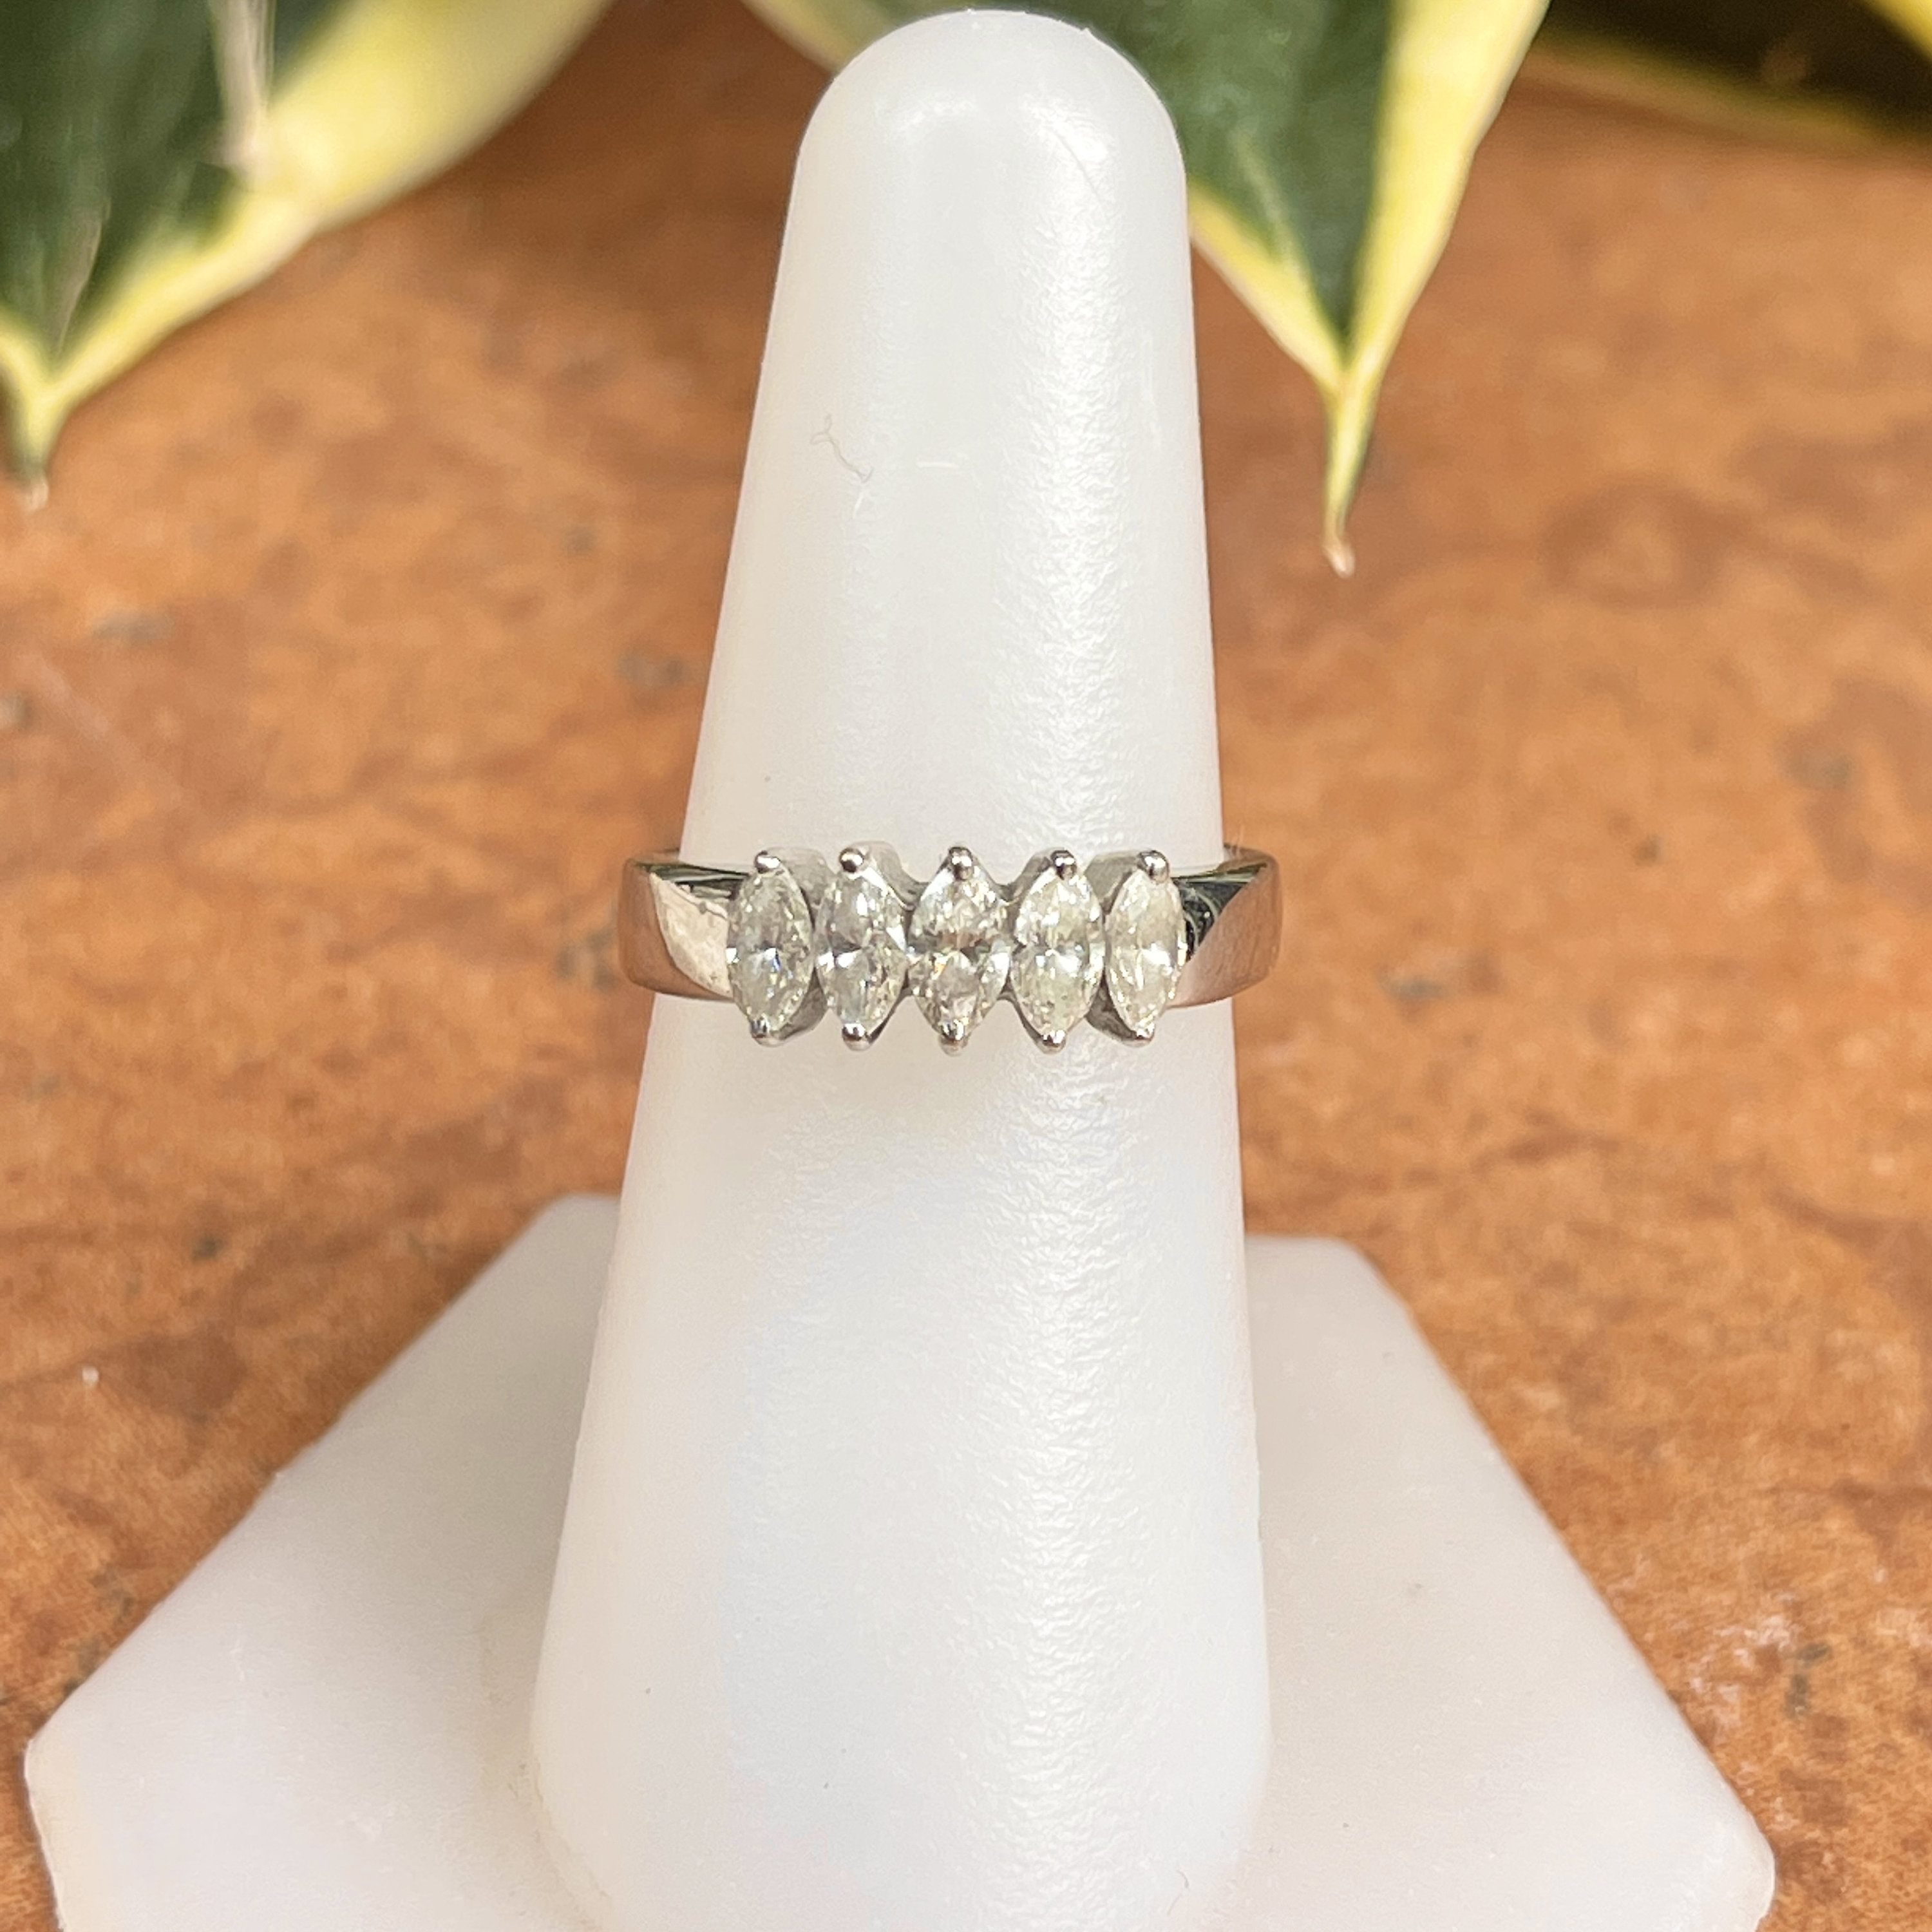 Trellis Engagement Ring in Silver With CZ cubic Zirconia Five Stone Trellis  Engagement Ring in Silver - Etsy